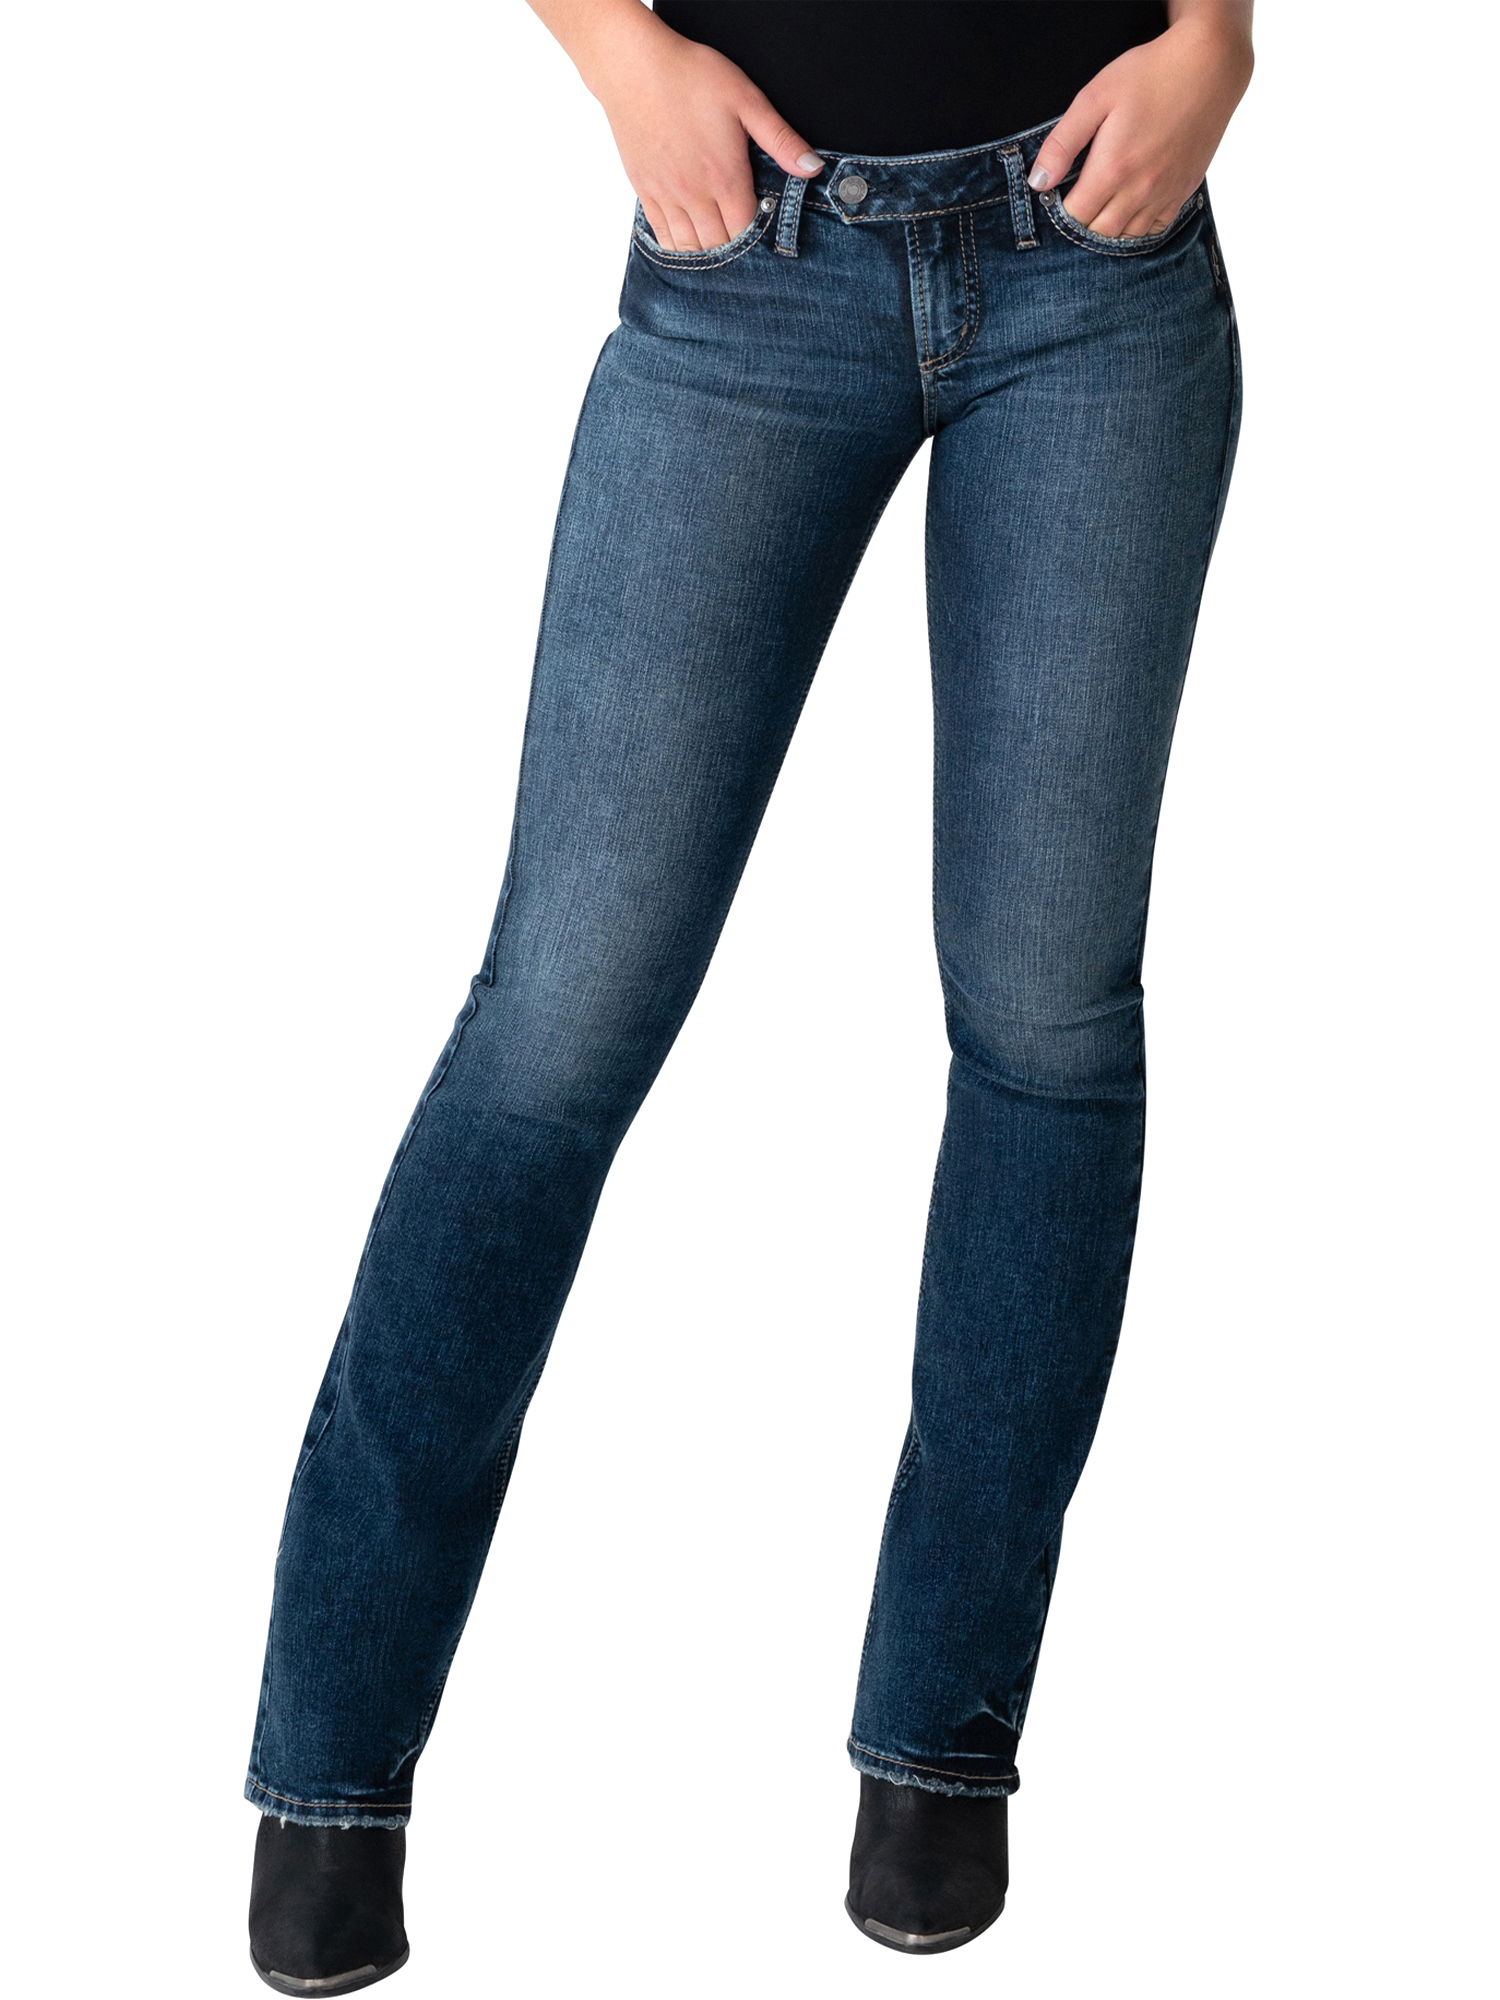 Silver Jeans Co. Women's Tuesday Low Rise Slim Bootcut Jeans, Waist Sizes 24-36 - image 1 of 3